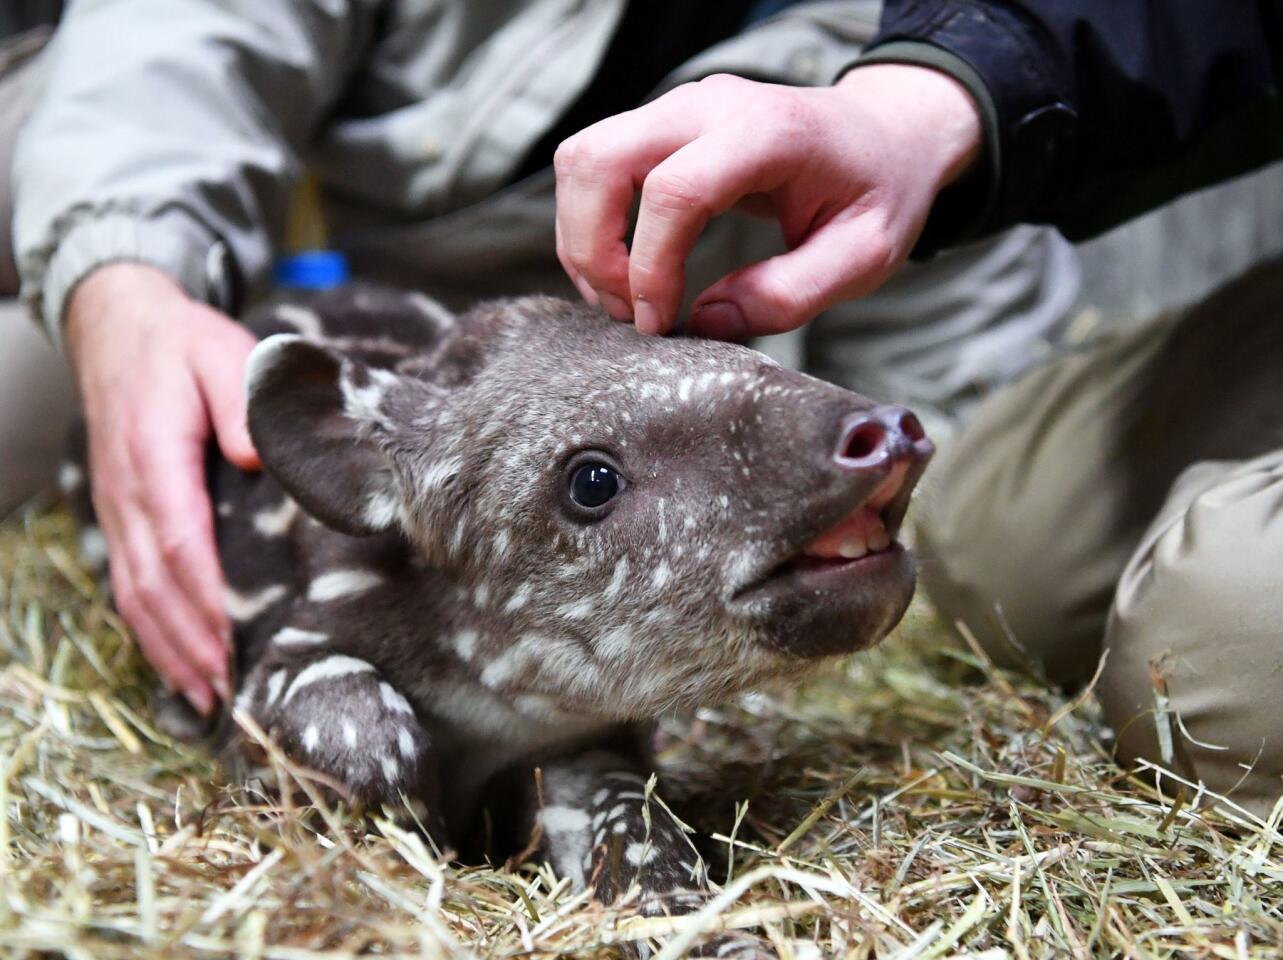 Employees at the zoo in Magdeburg, Germany, pet a 2-week-old South American tapir on Nov. 24, 2016. The still nameless female tapir baby is bottle-fed by her keepers, as her mother "Tala" had attacked her child.